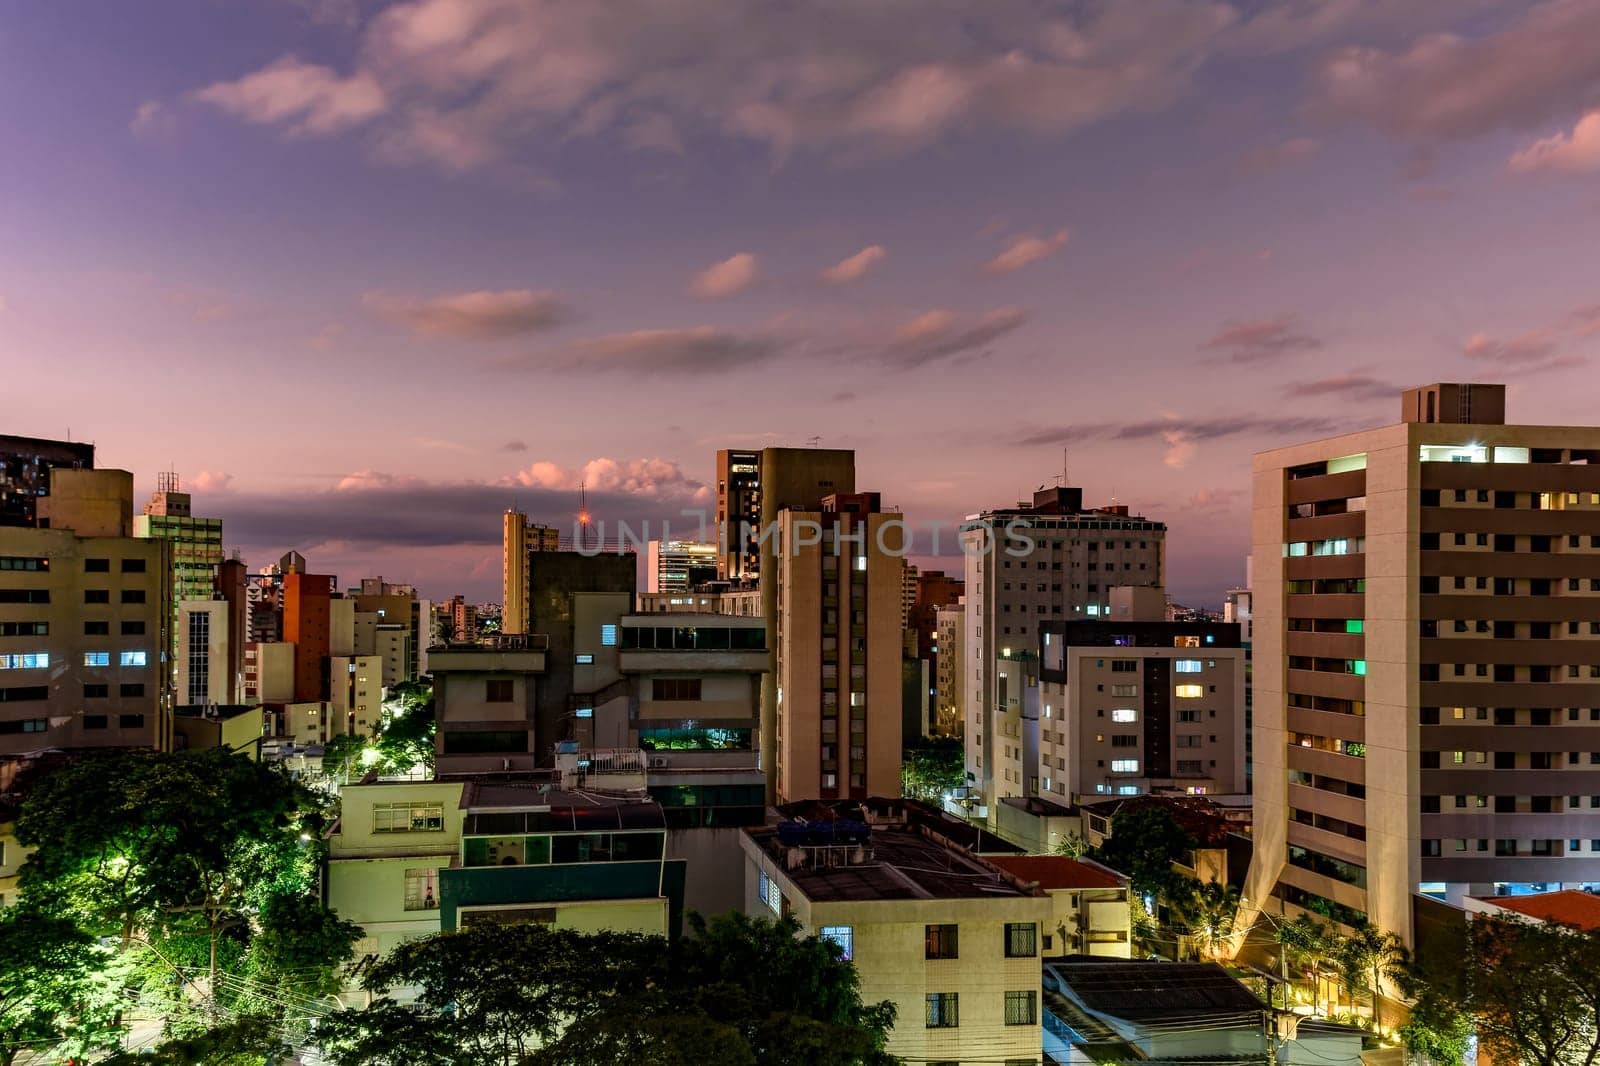 Belo Horizonte city and its constructions by Fred_Pinheiro